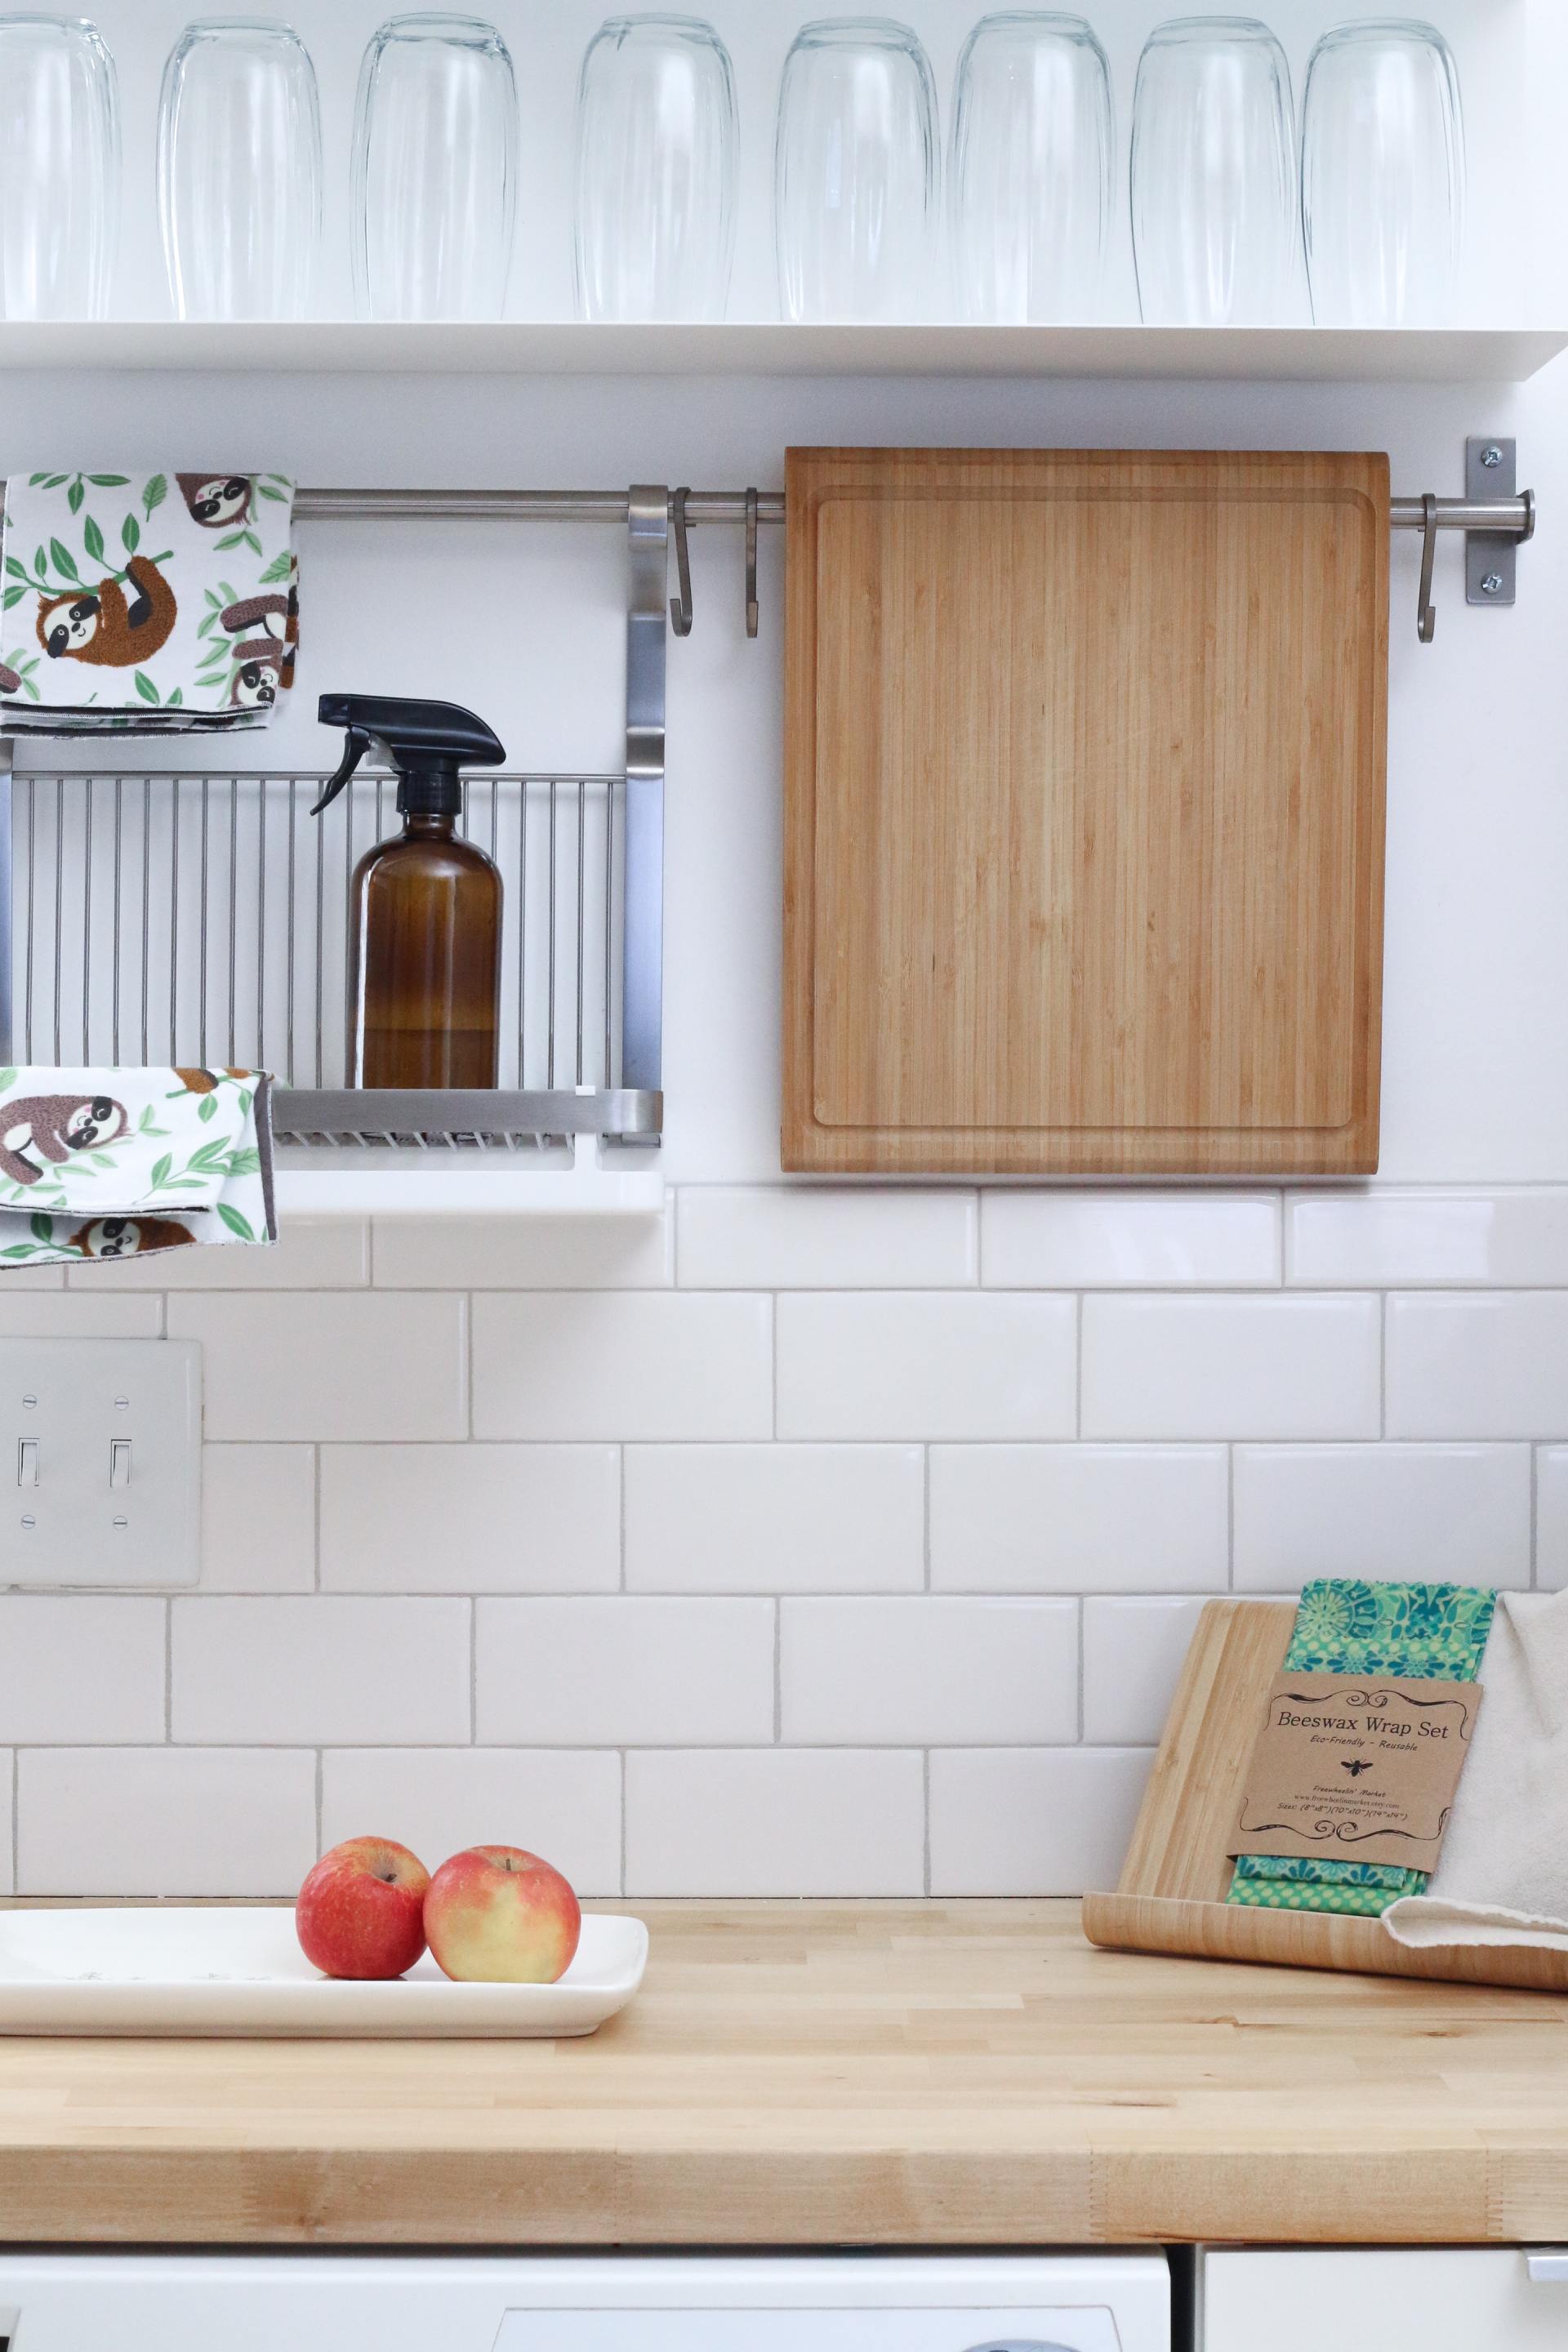 Image depicts a kitchen are with white tiles  chopping board on the bench and some cleaning products.